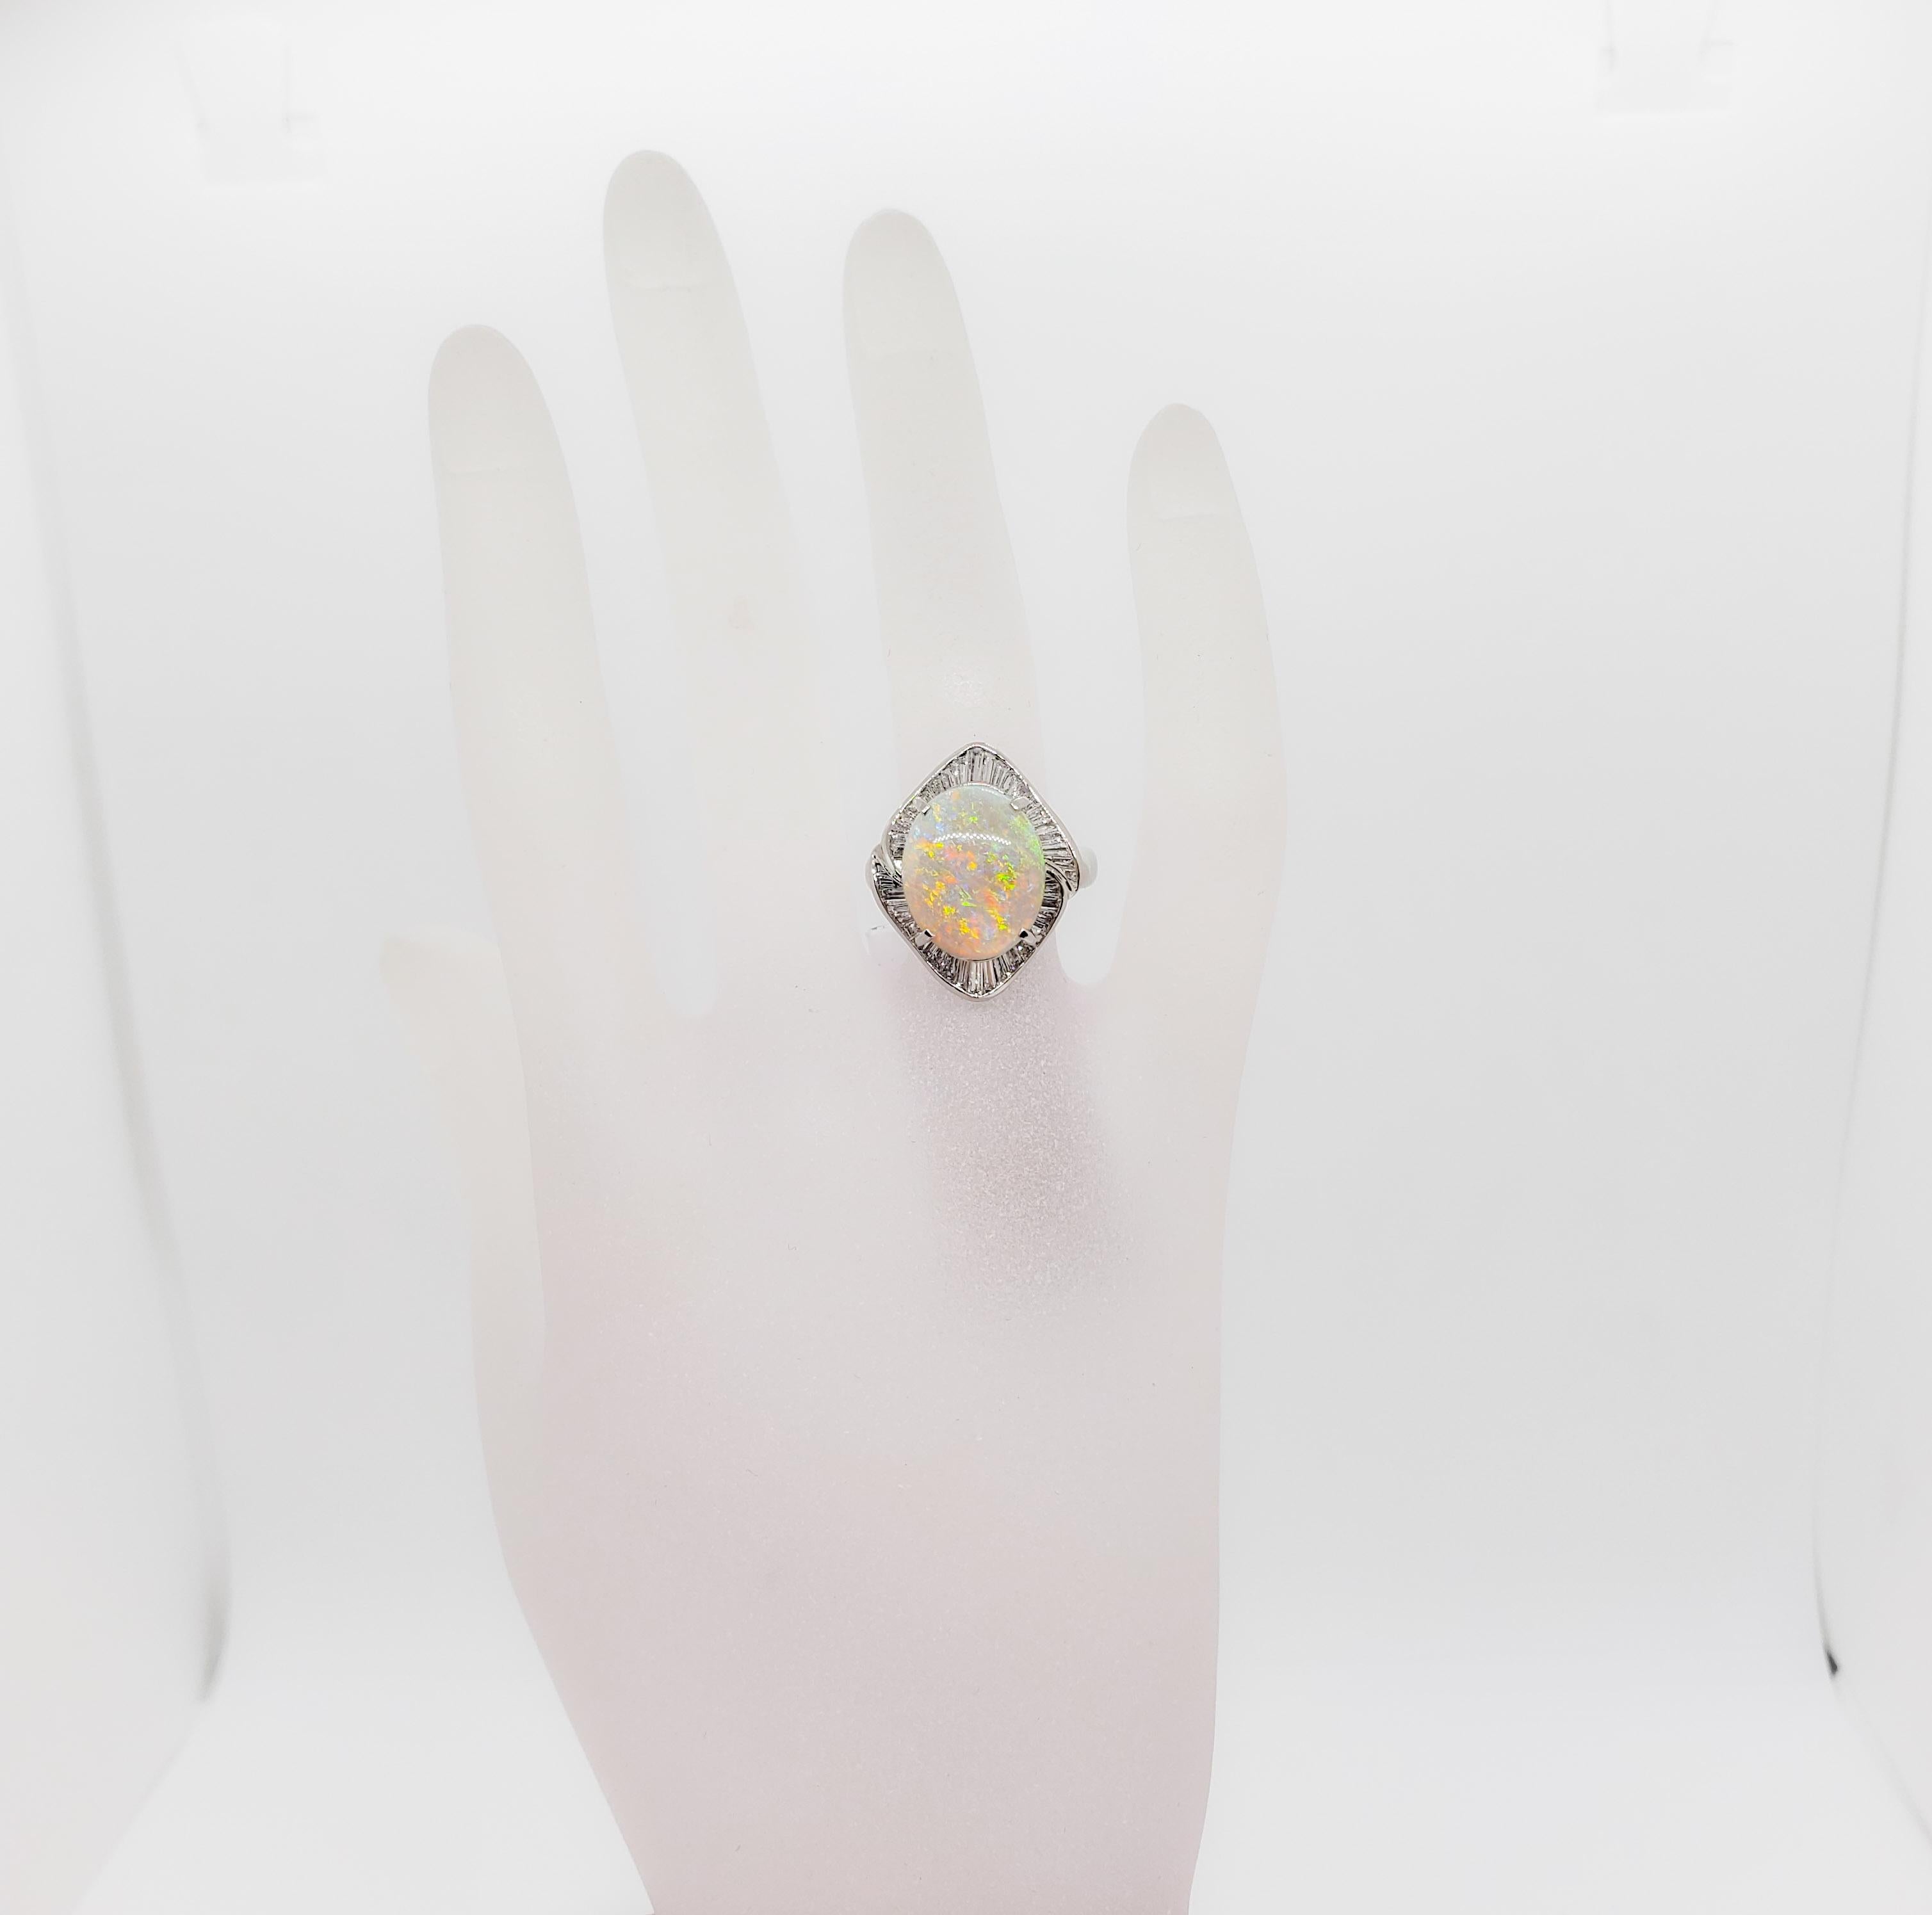 Beautiful 5.80 ct. white opal oval with 0.91 ct. of good quality white diamond baguettes.  Handmade platinum mounting in size 6.5.  Mint condition.